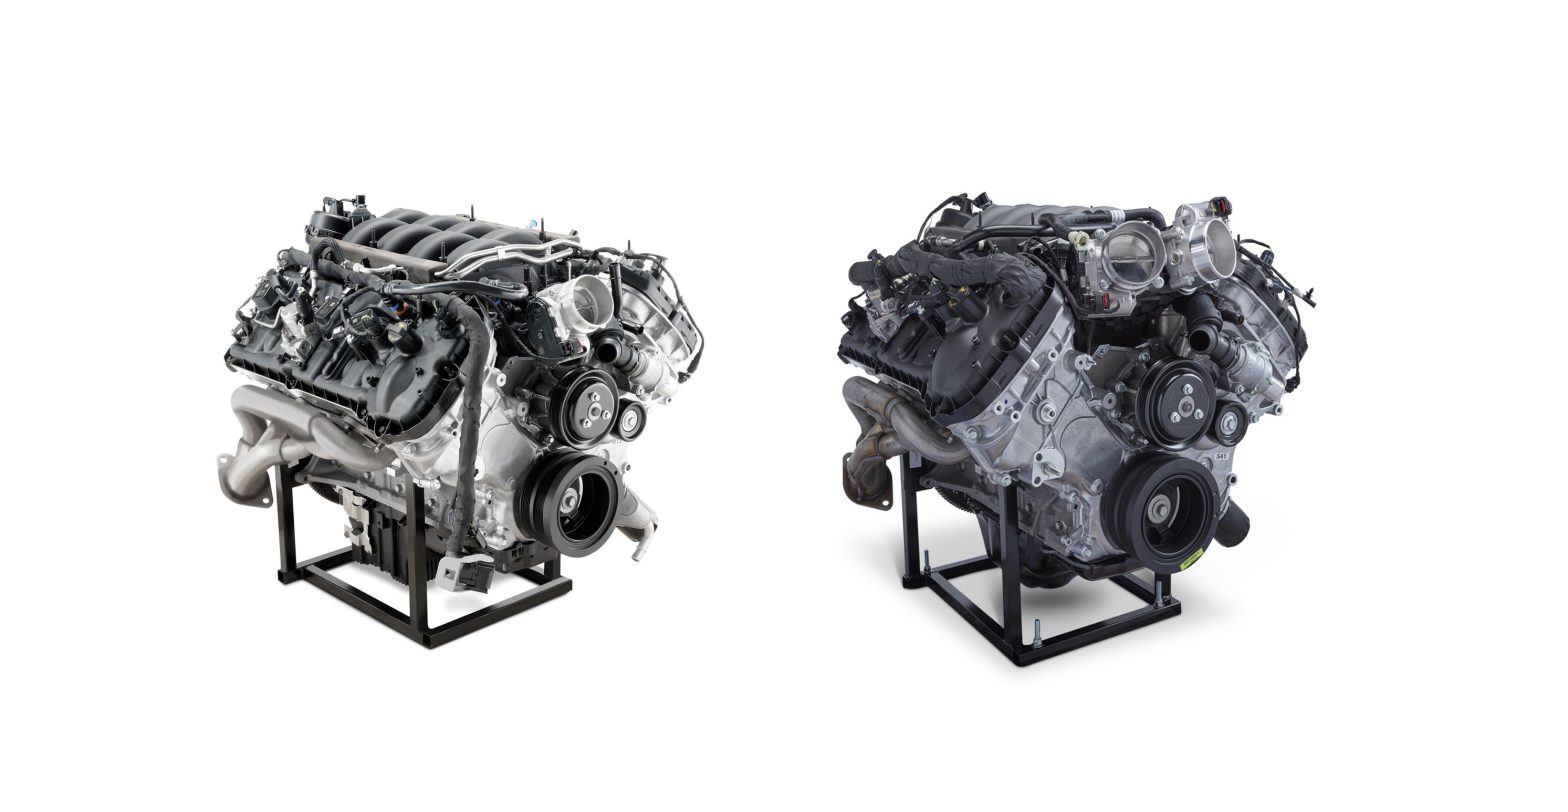 Ford Introduces V8 Crate Engine Option for New Mustang Model